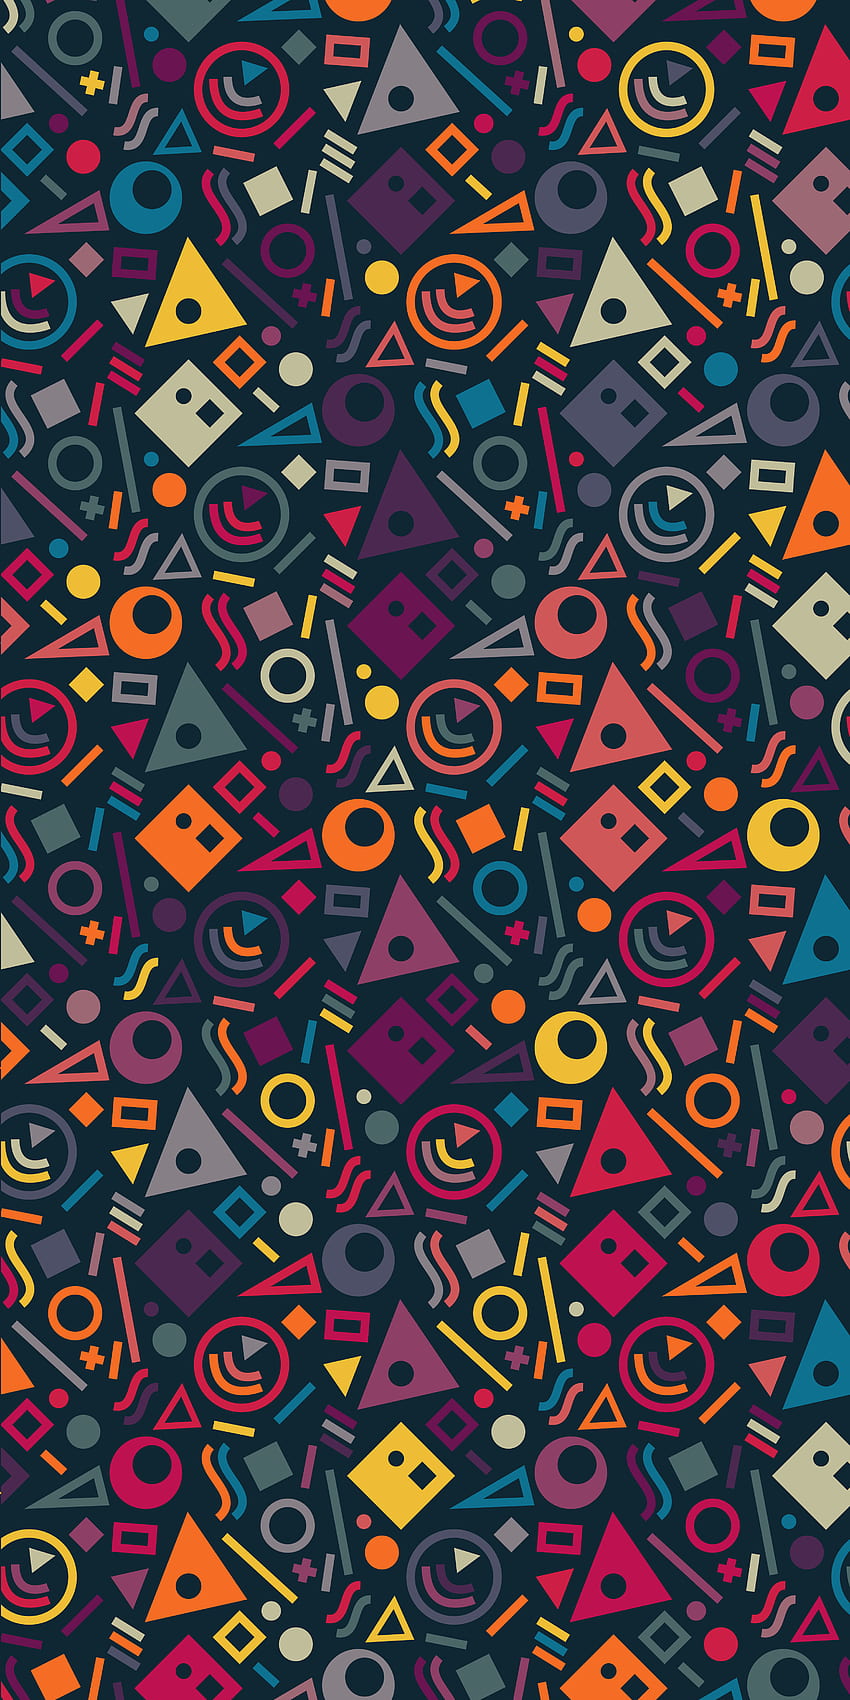 Inspired by the colours and shapes of the 90's Memphis style, 90s HD phone wallpaper